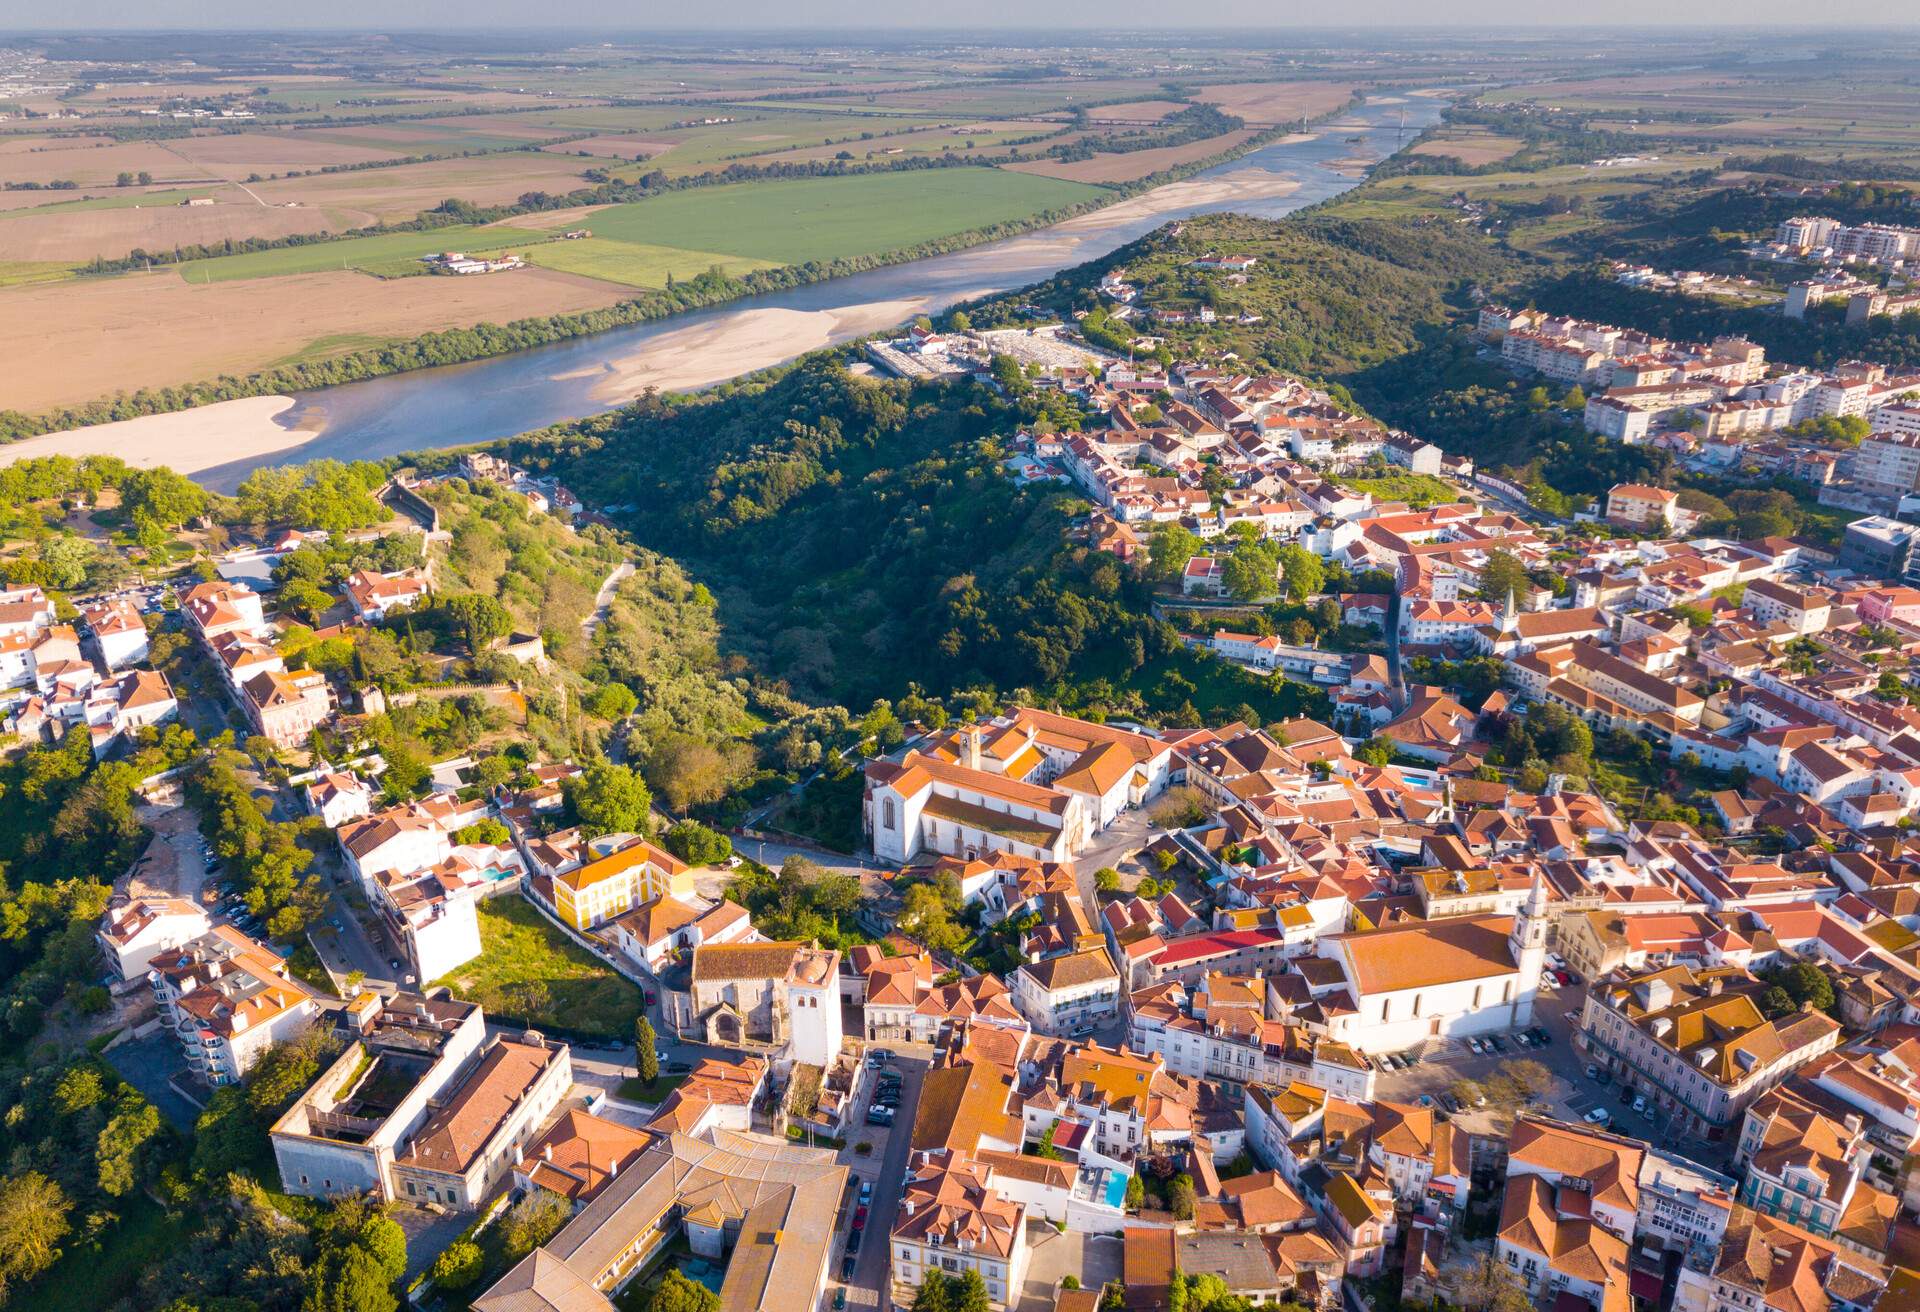 Aerial panoramic view of  Santarem city with buildings and landscape, Portugal; Shutterstock ID 1414384193